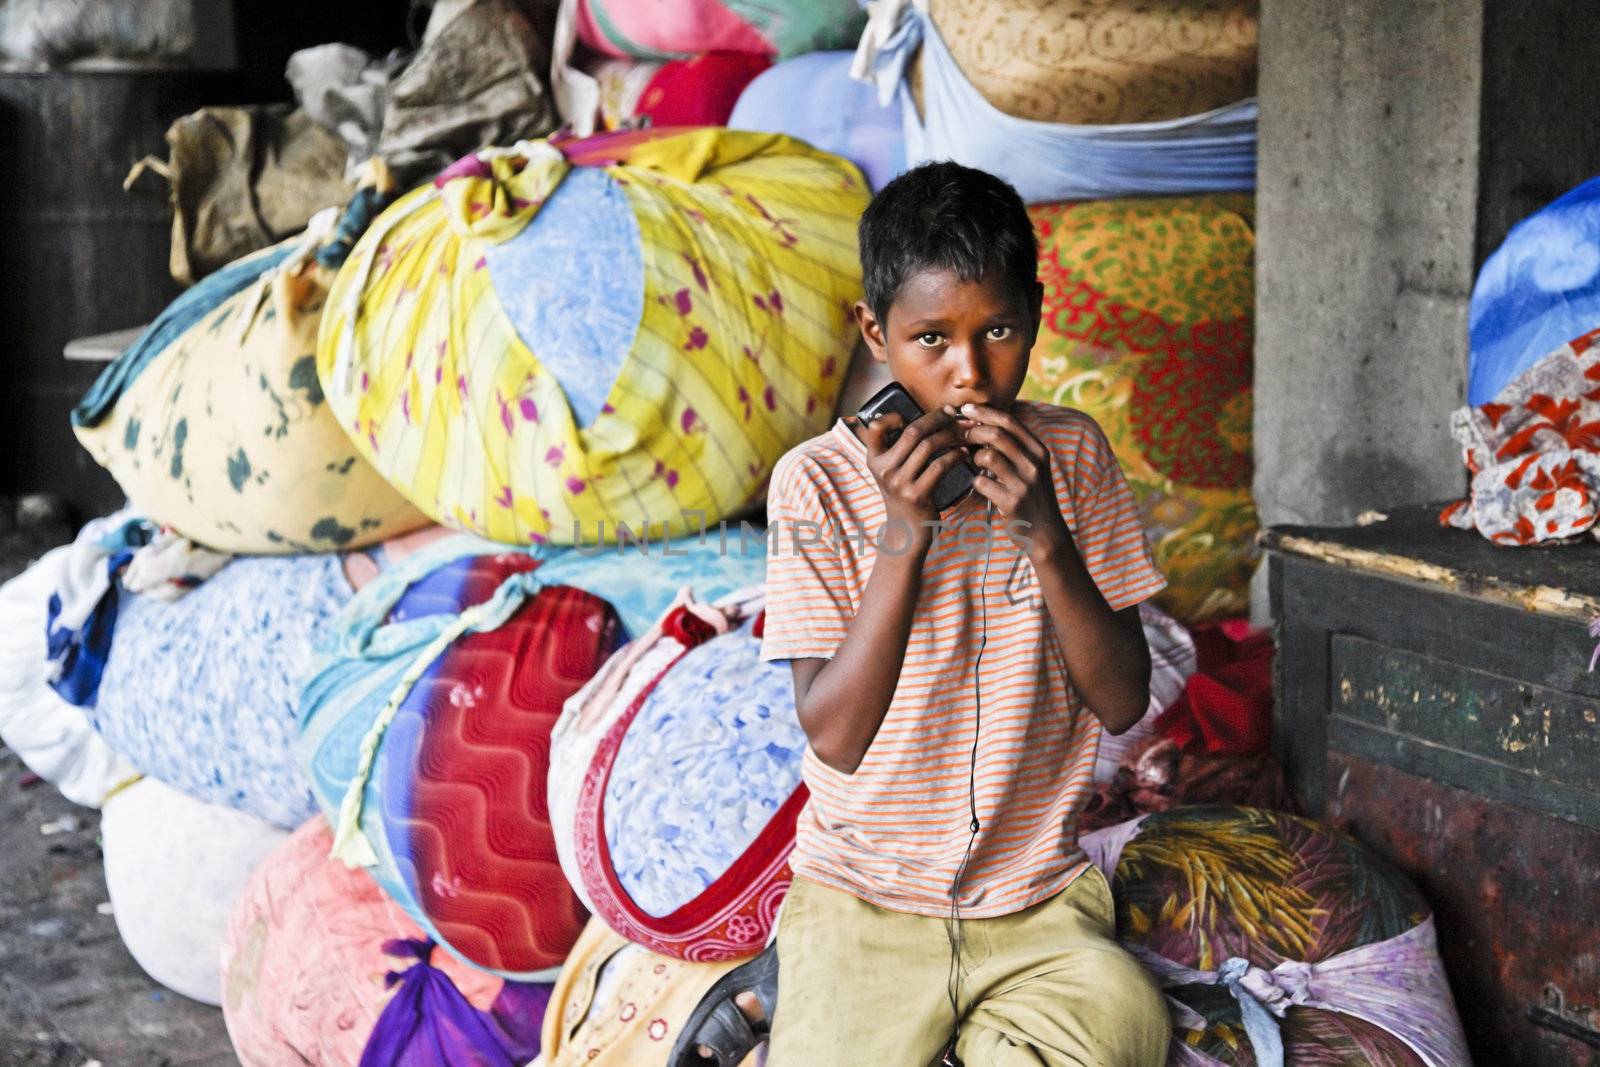 DHOBHI GHAT, MUMBAI, INDIA - FEBRUARY 25, 2012: In the squaller of the commercial hand wash clothes laundry in the heart of Bombay, a boy laborer holds on to his mobile cell phone looking straight into camera lens